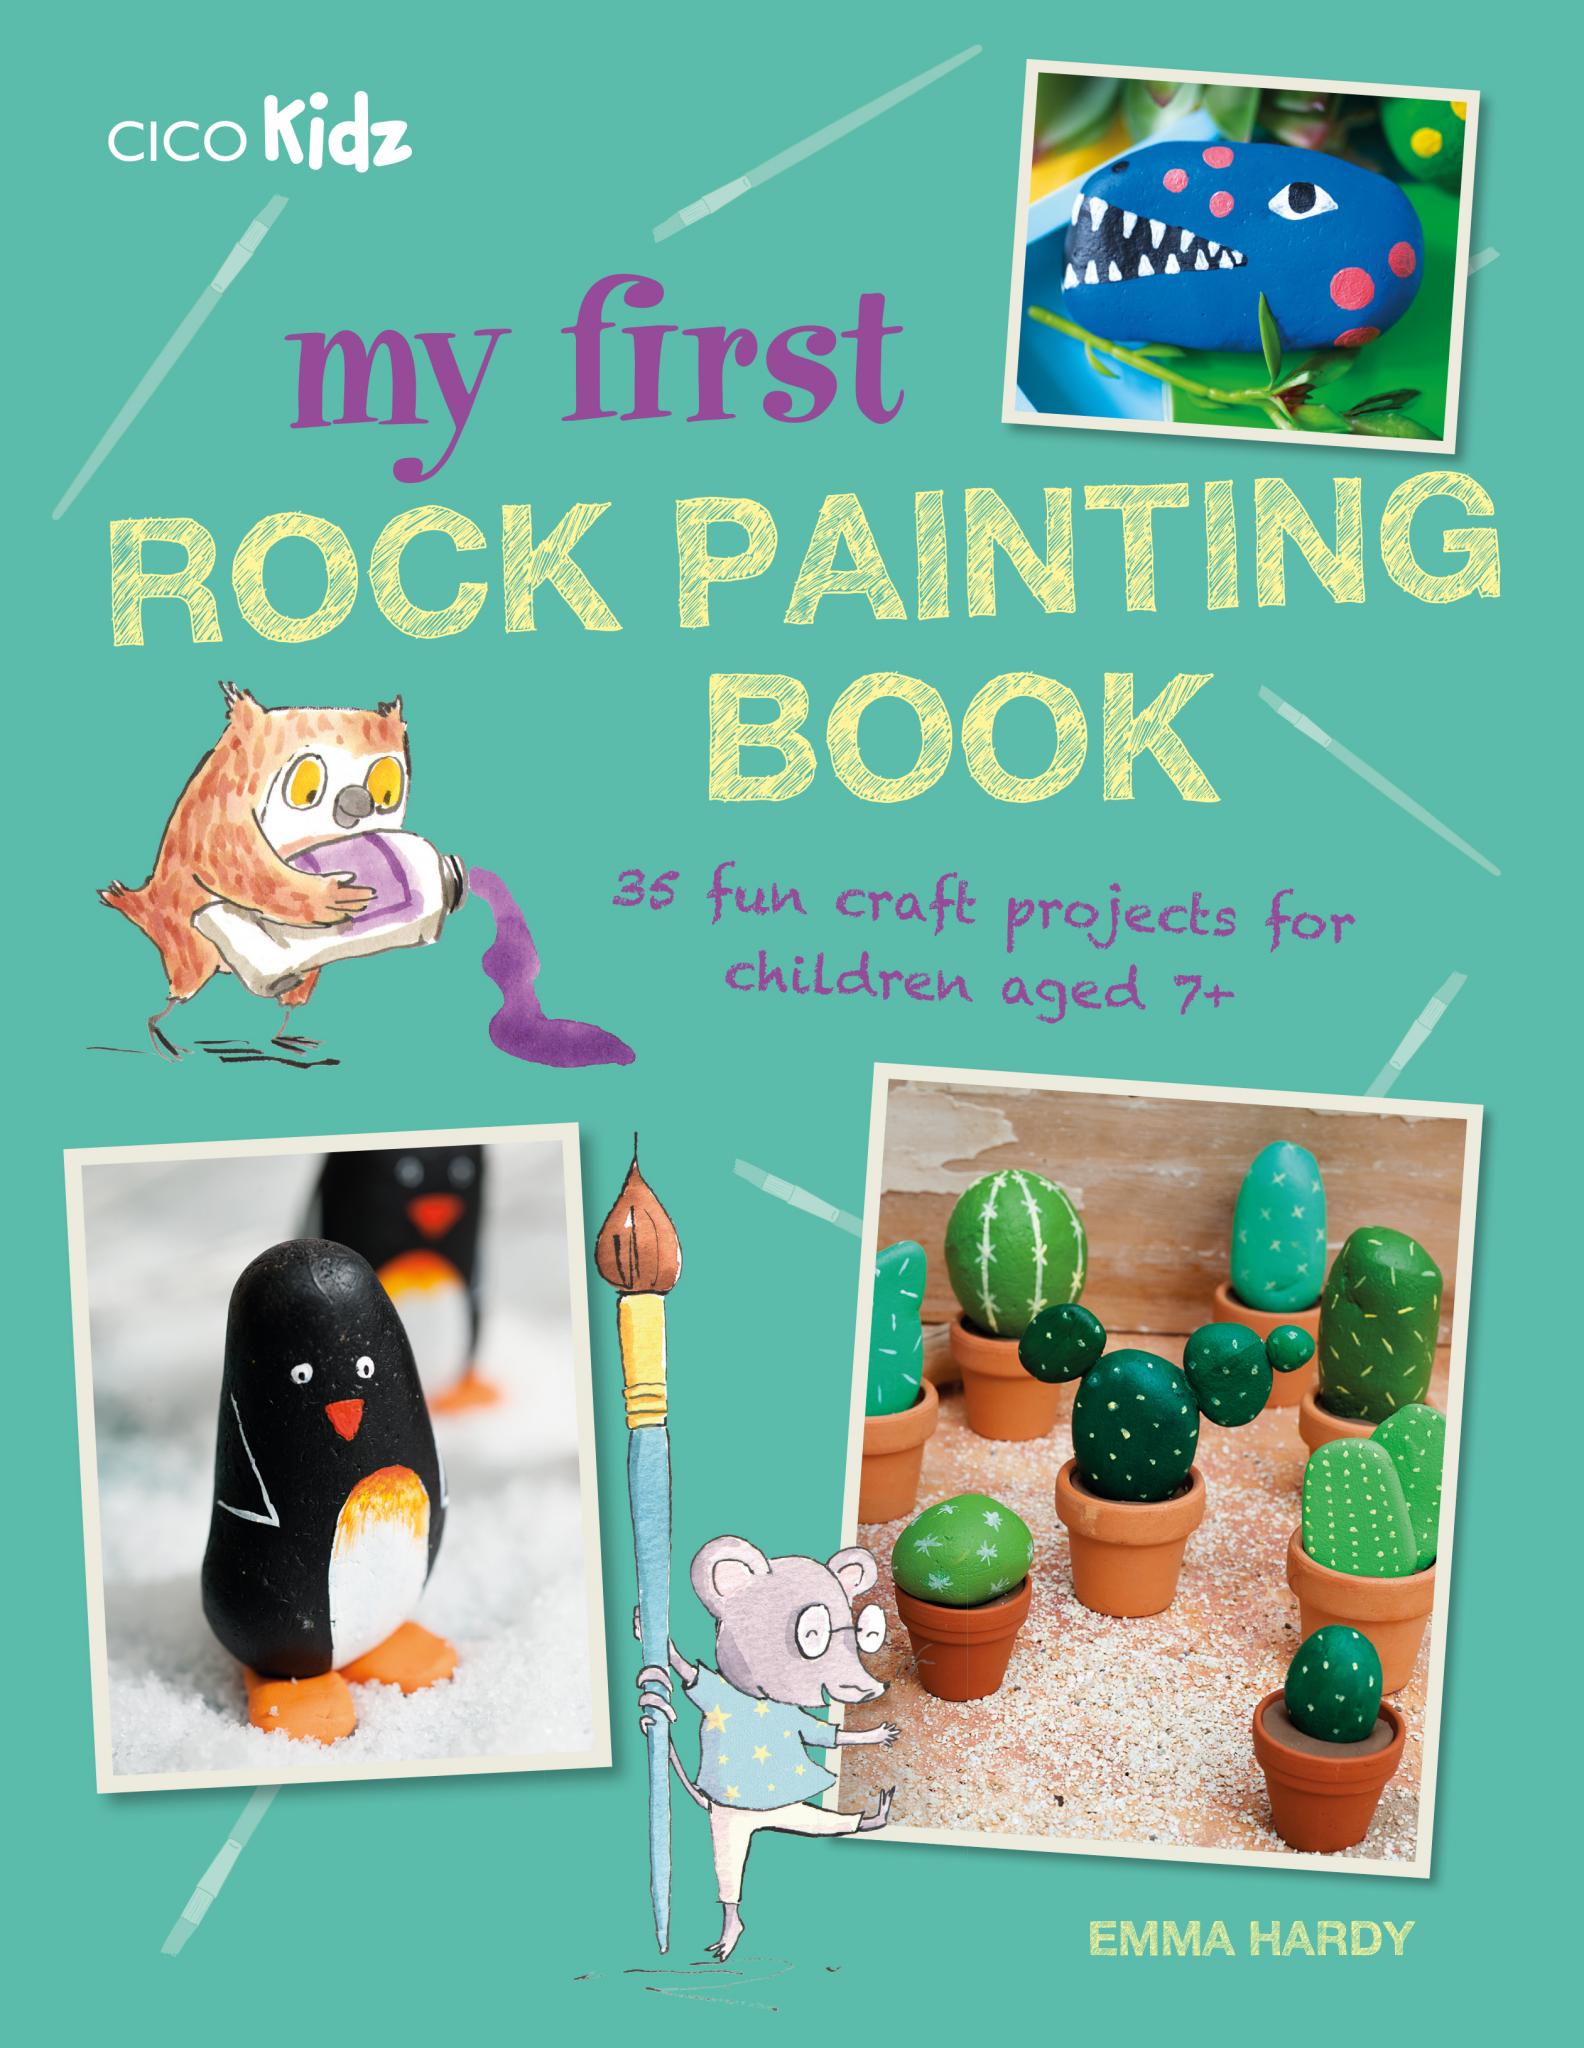 My First Painting and Collage Book: 35 Fun and Easy Art Projects for Children Aged 7 Plus [Book]